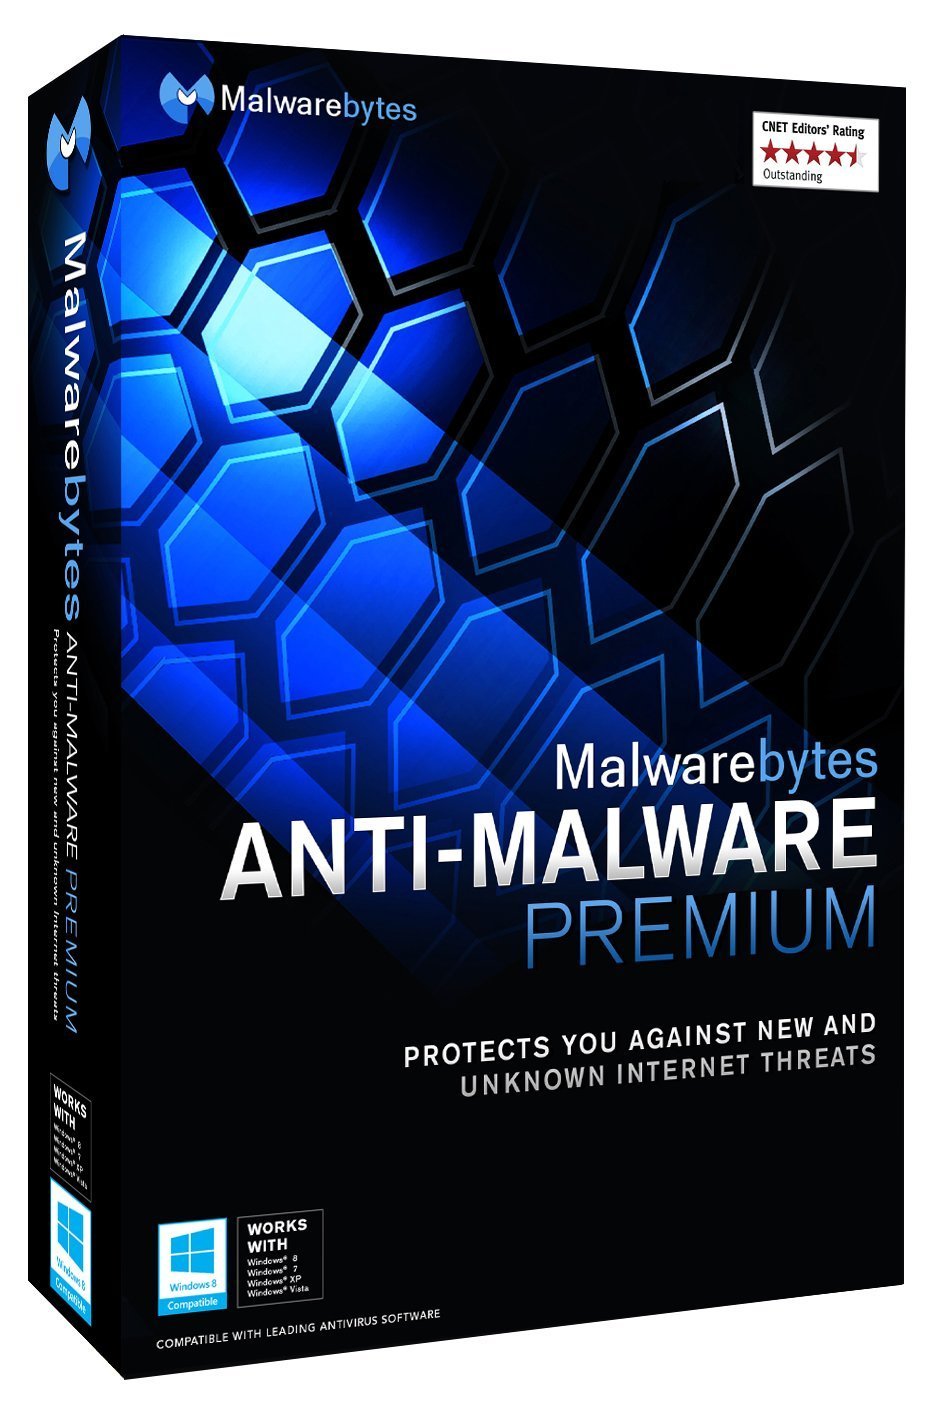 articles on malwarebytes endpoint protection for mac